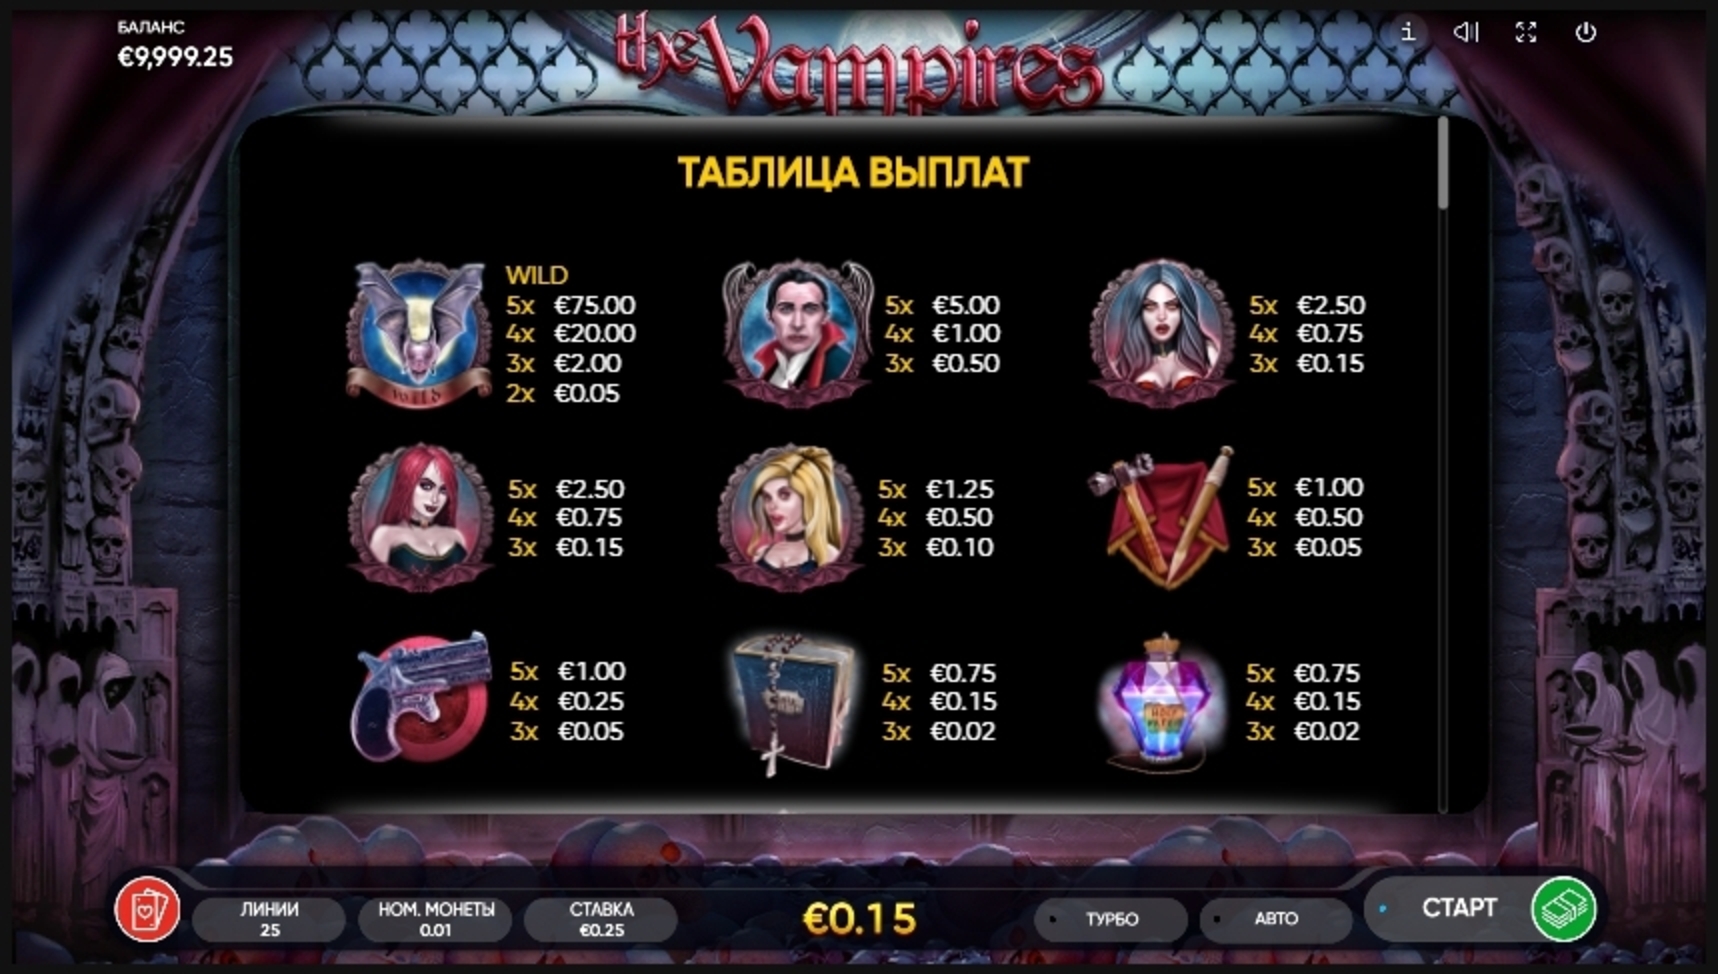 Info of The Vampires Slot Game by Endorphina